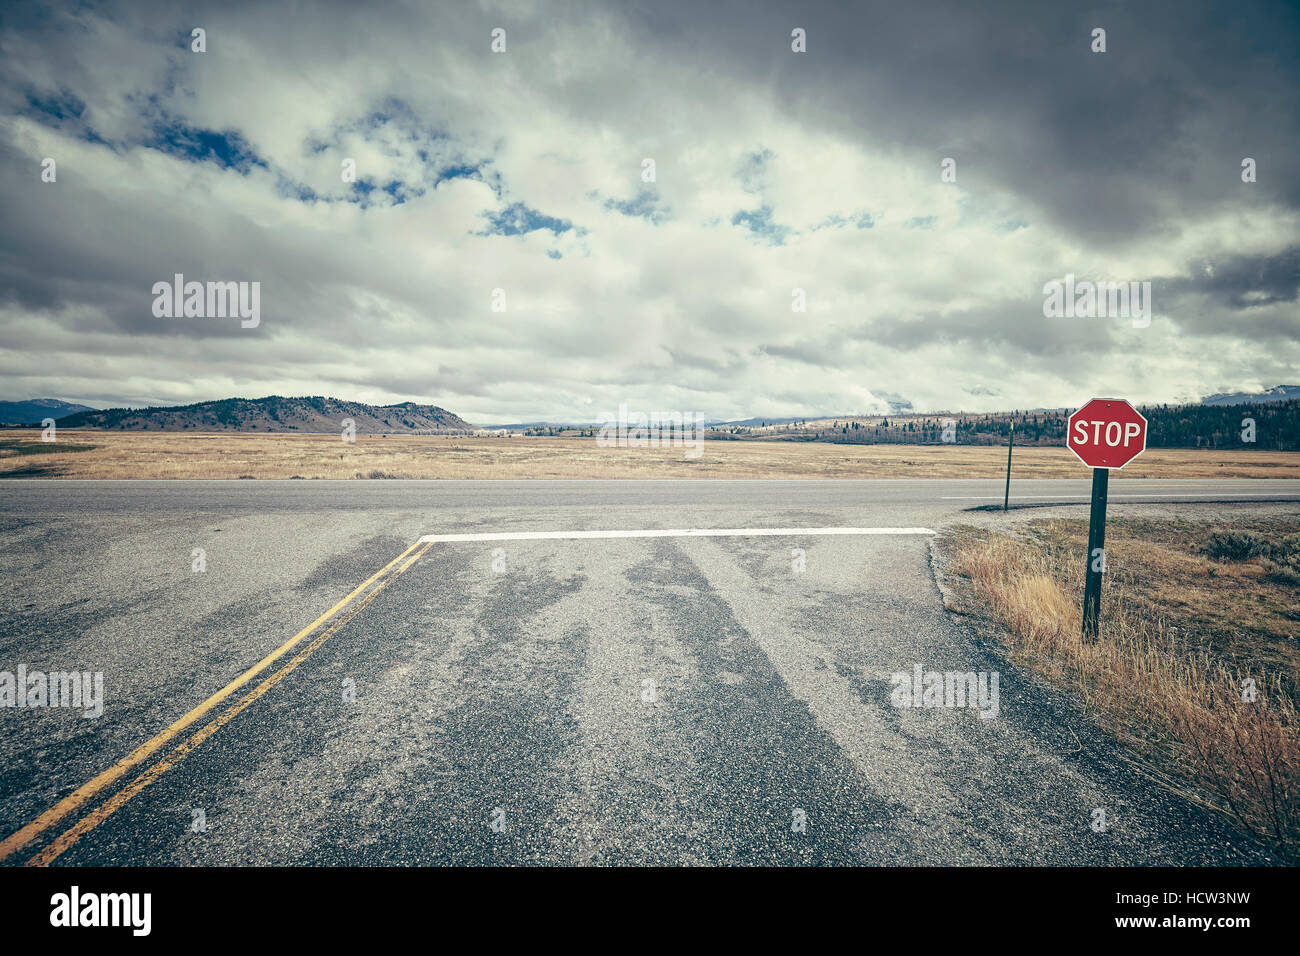 Retro stylized road intersection with stop sign on a cloudy day, conceptual picture, USA. Stock Photo